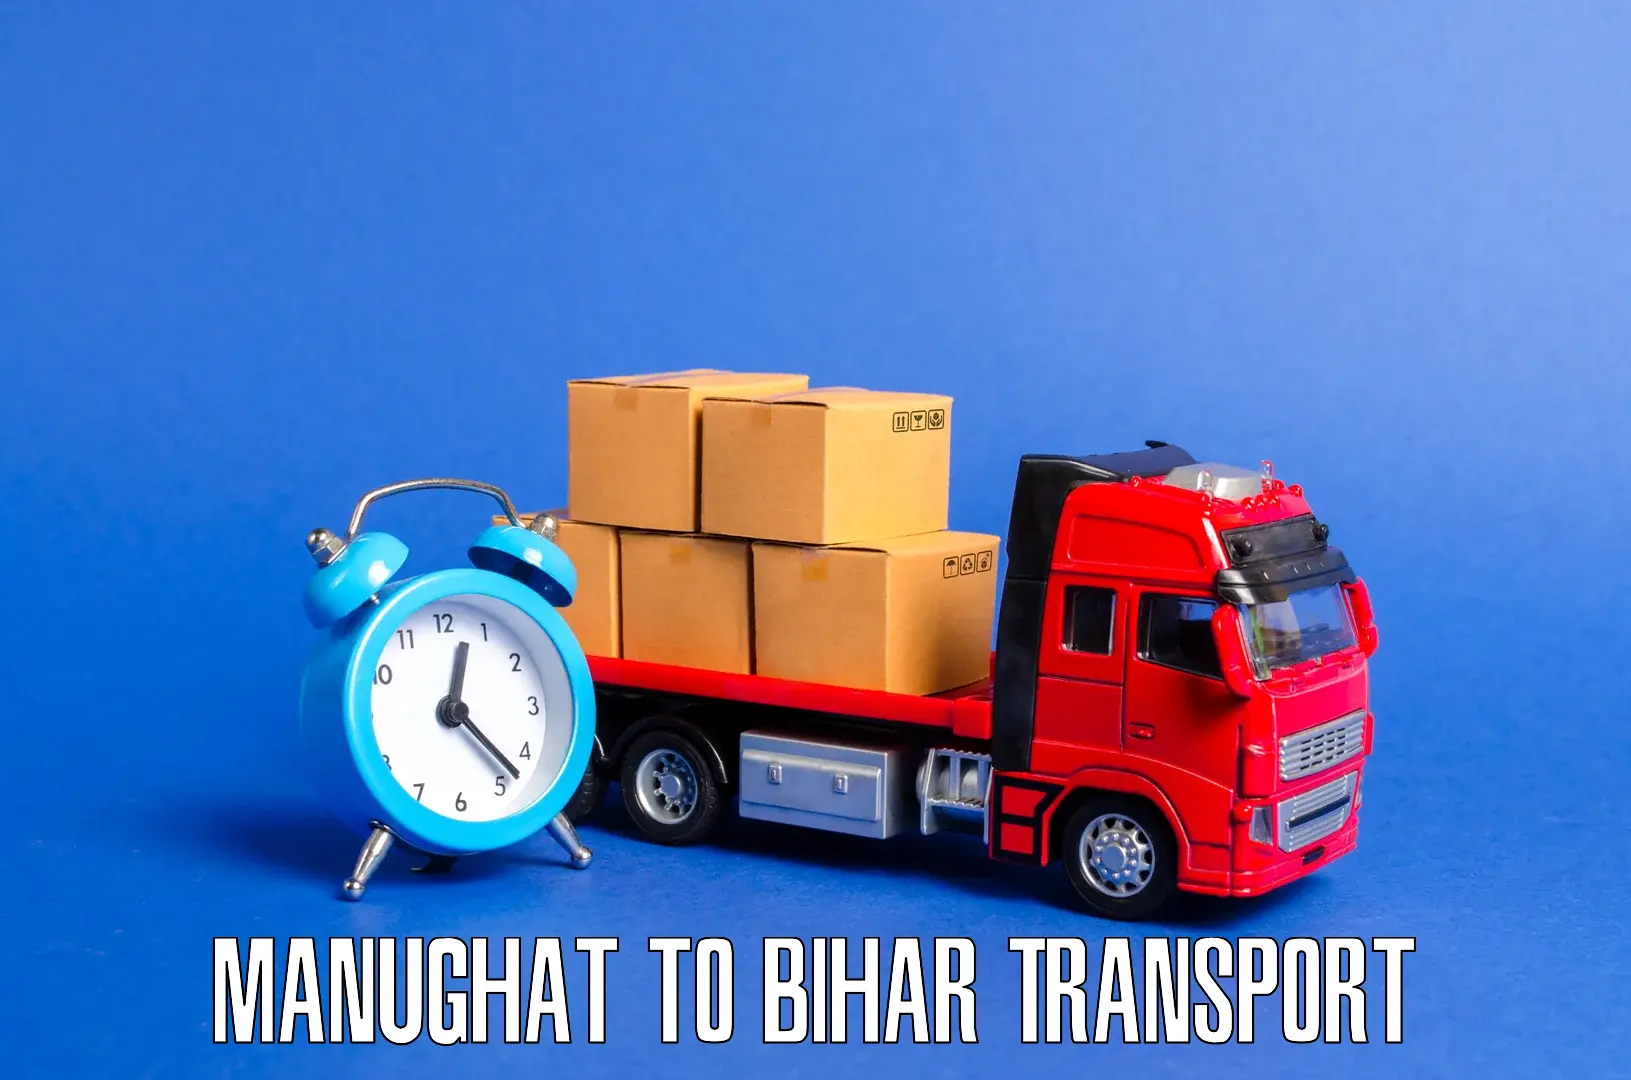 Cargo transport services in Manughat to Bhorey